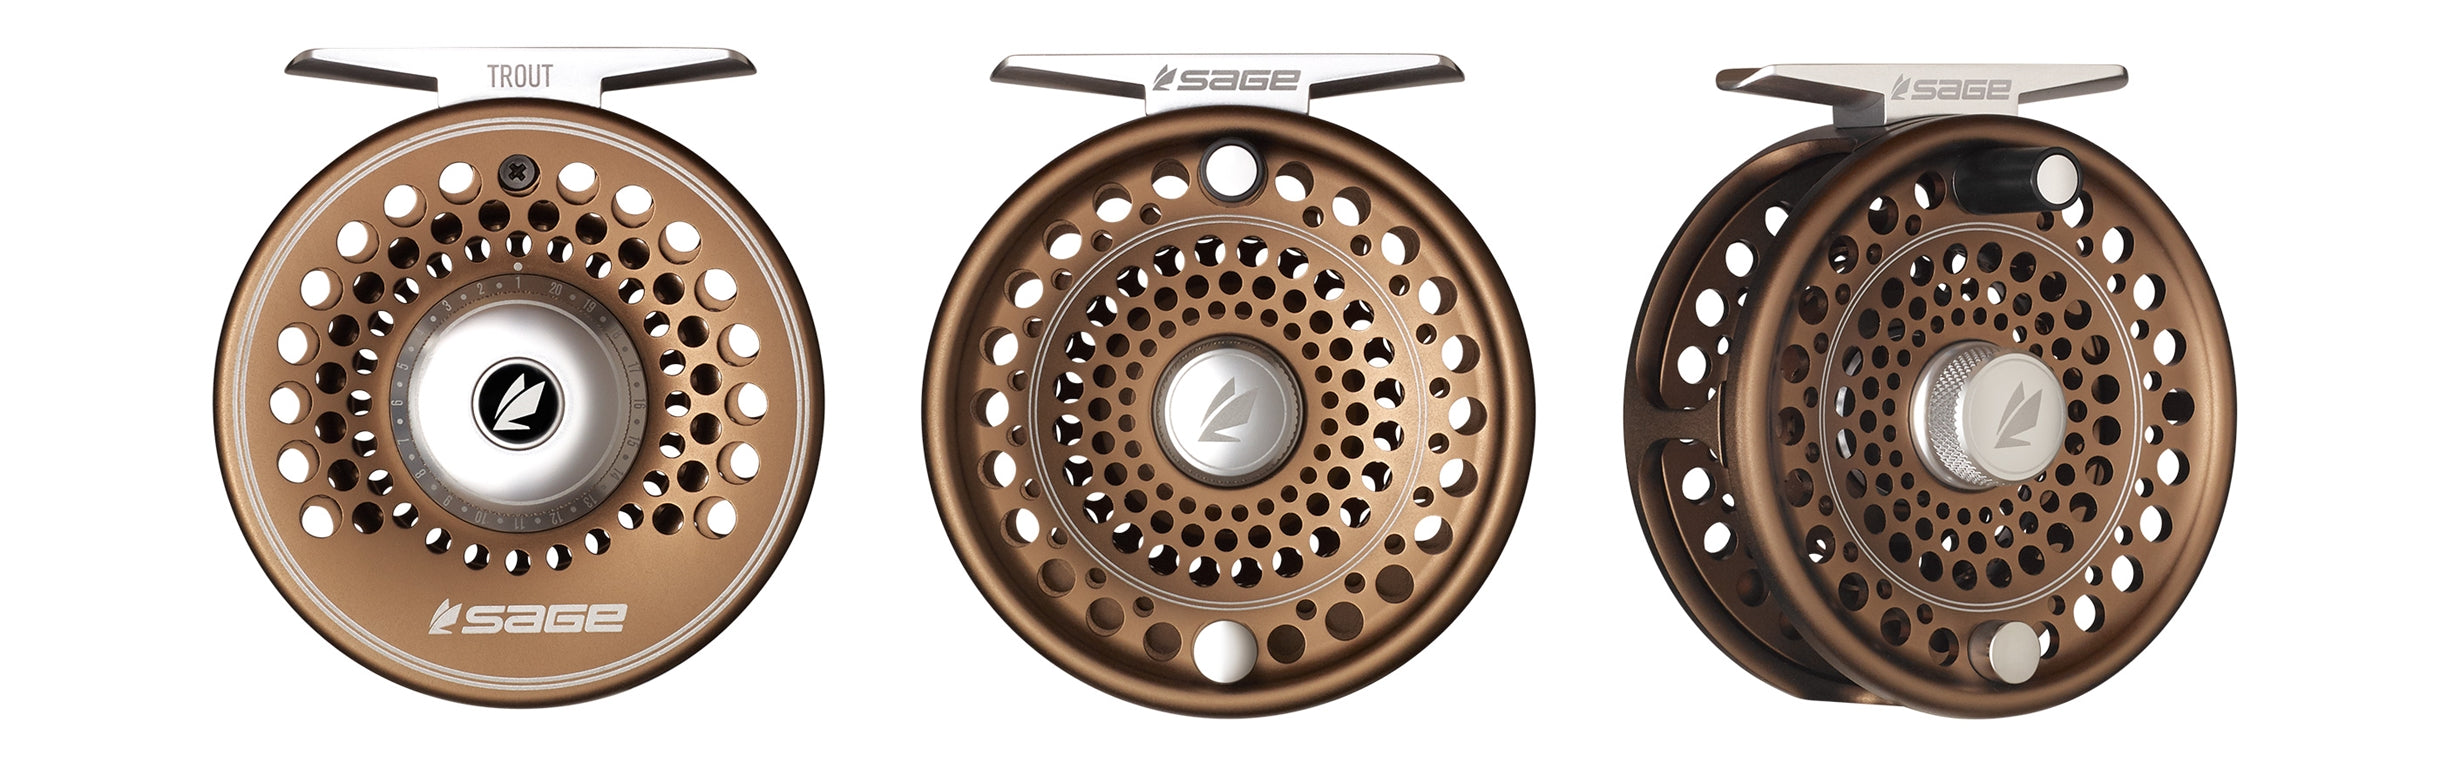 SCIENTIFIC ANGLERS SYSTEM 2 3 1/2″ #7/8 LIGHT SALMON/TROUT FLY